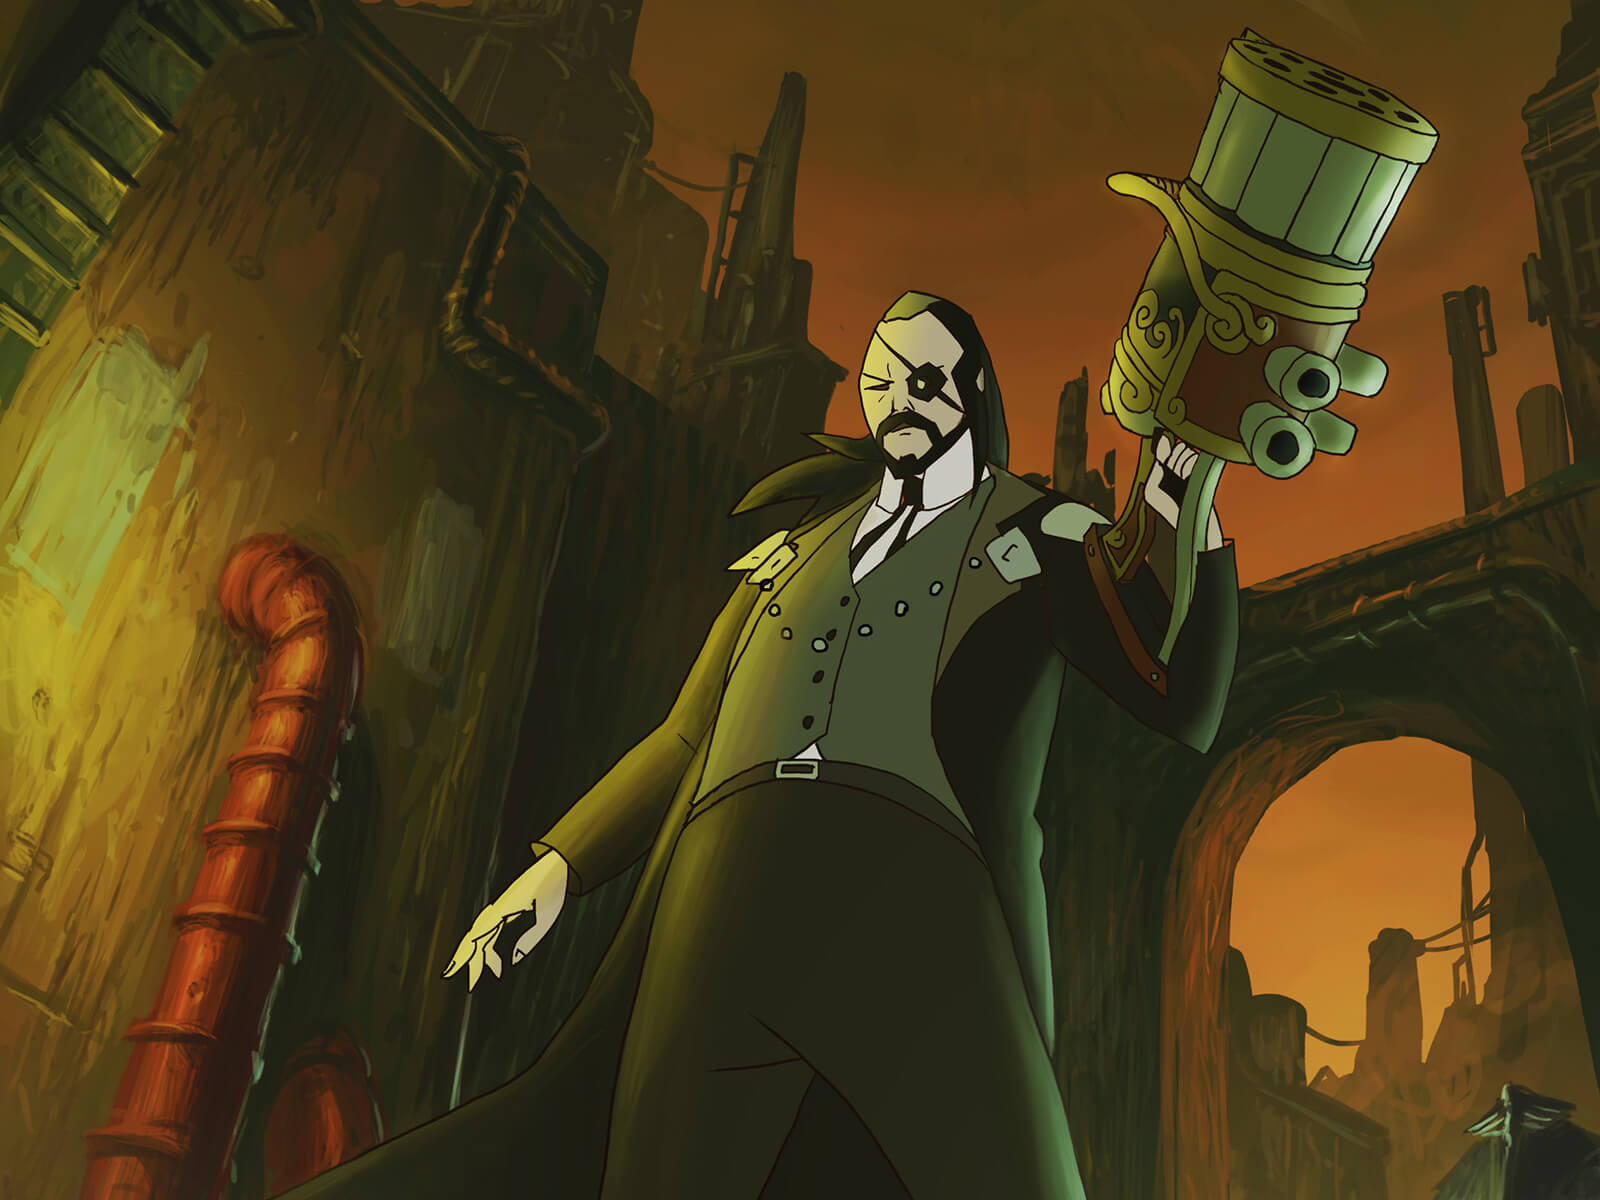 A man in an eye patch and steampunk garb stands in an industrial alleyway holding a large barrel-shaped weapon in one hand.